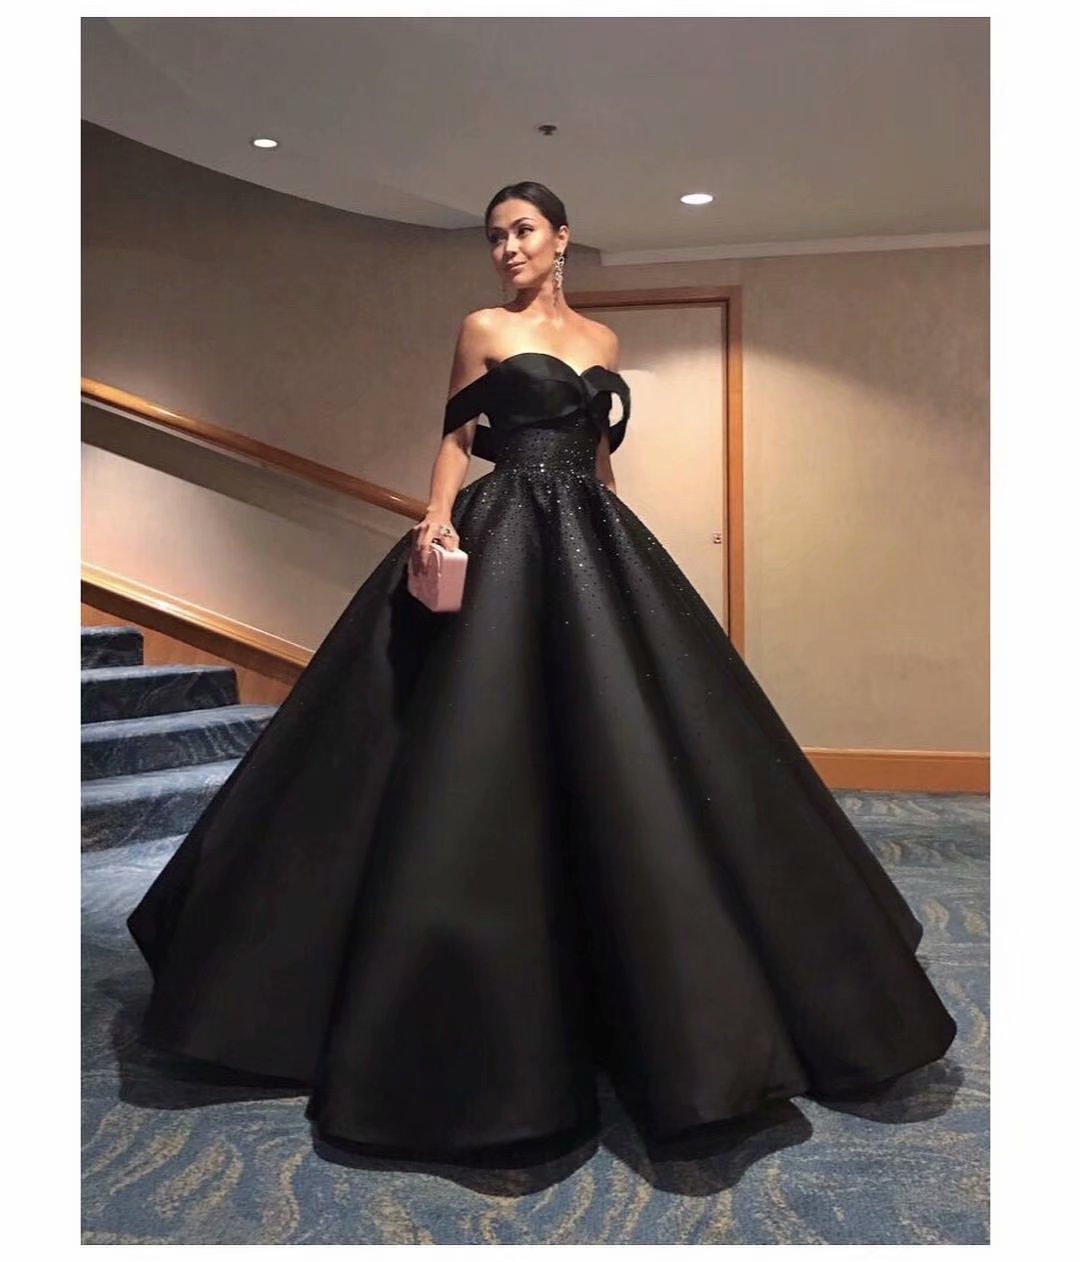 Sexy Black Prom Gowns Satin Formal Dresses Featuring Rhinestone Beaded Bodice With Sweetheart Neckline -- Long Elegant Prom Dresses, Sexy Evening